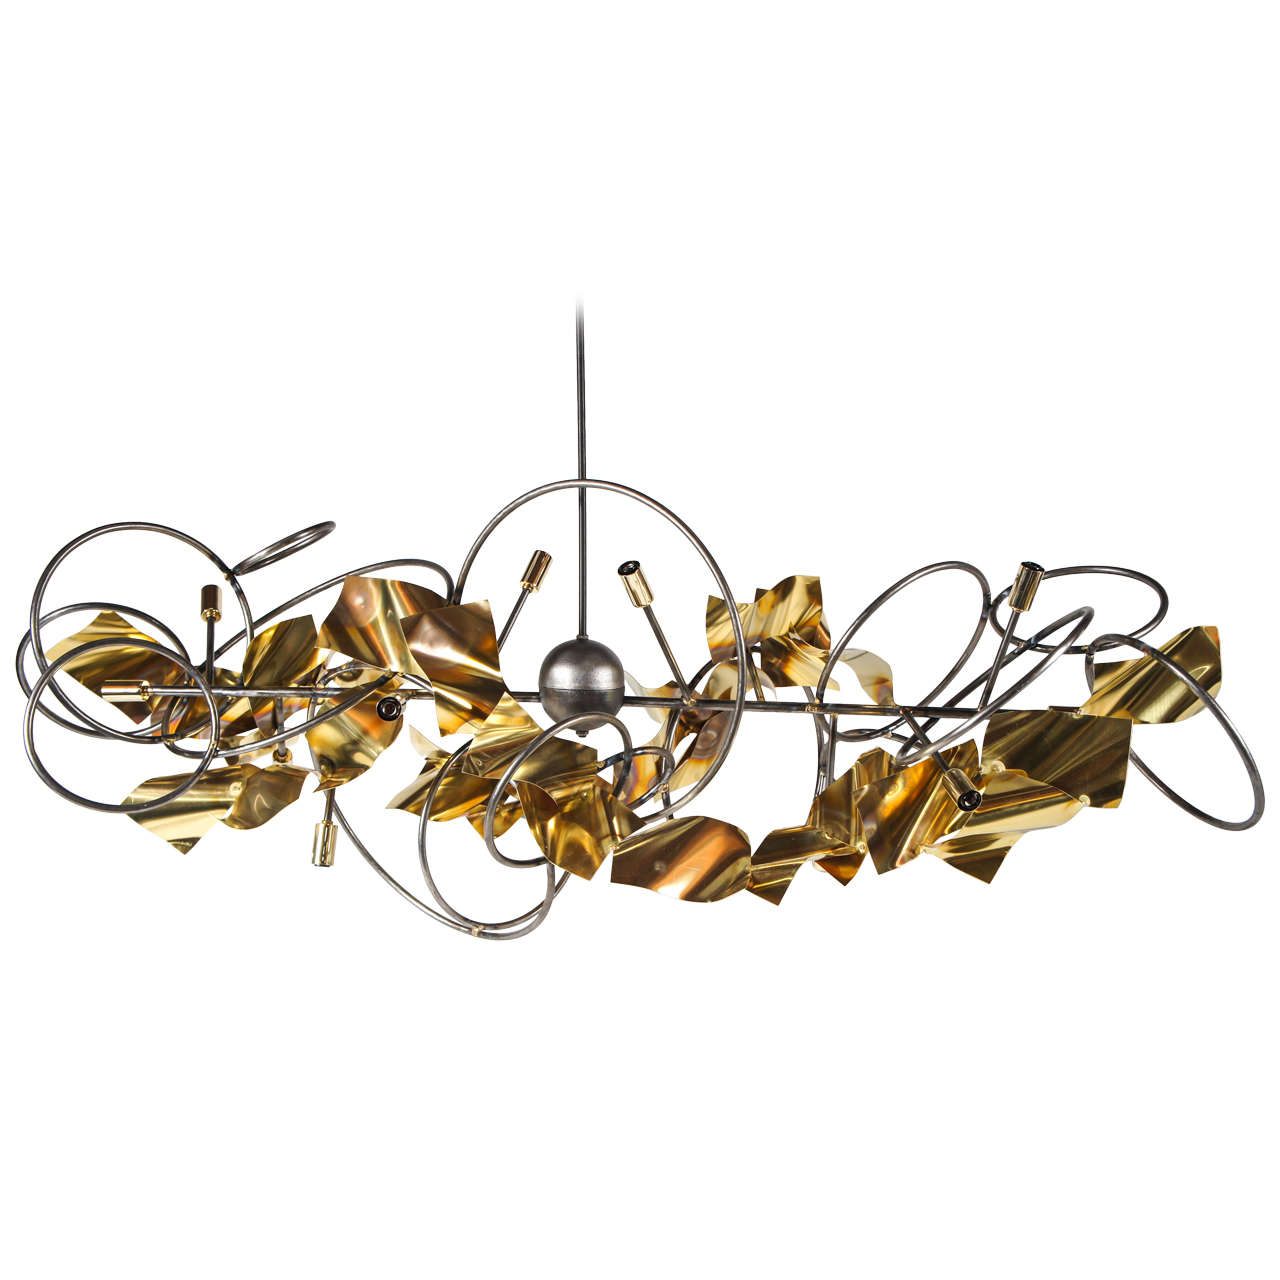 Custom "Convolutions" Original Chandelier, made in the USA, by Lou Blass For Sale